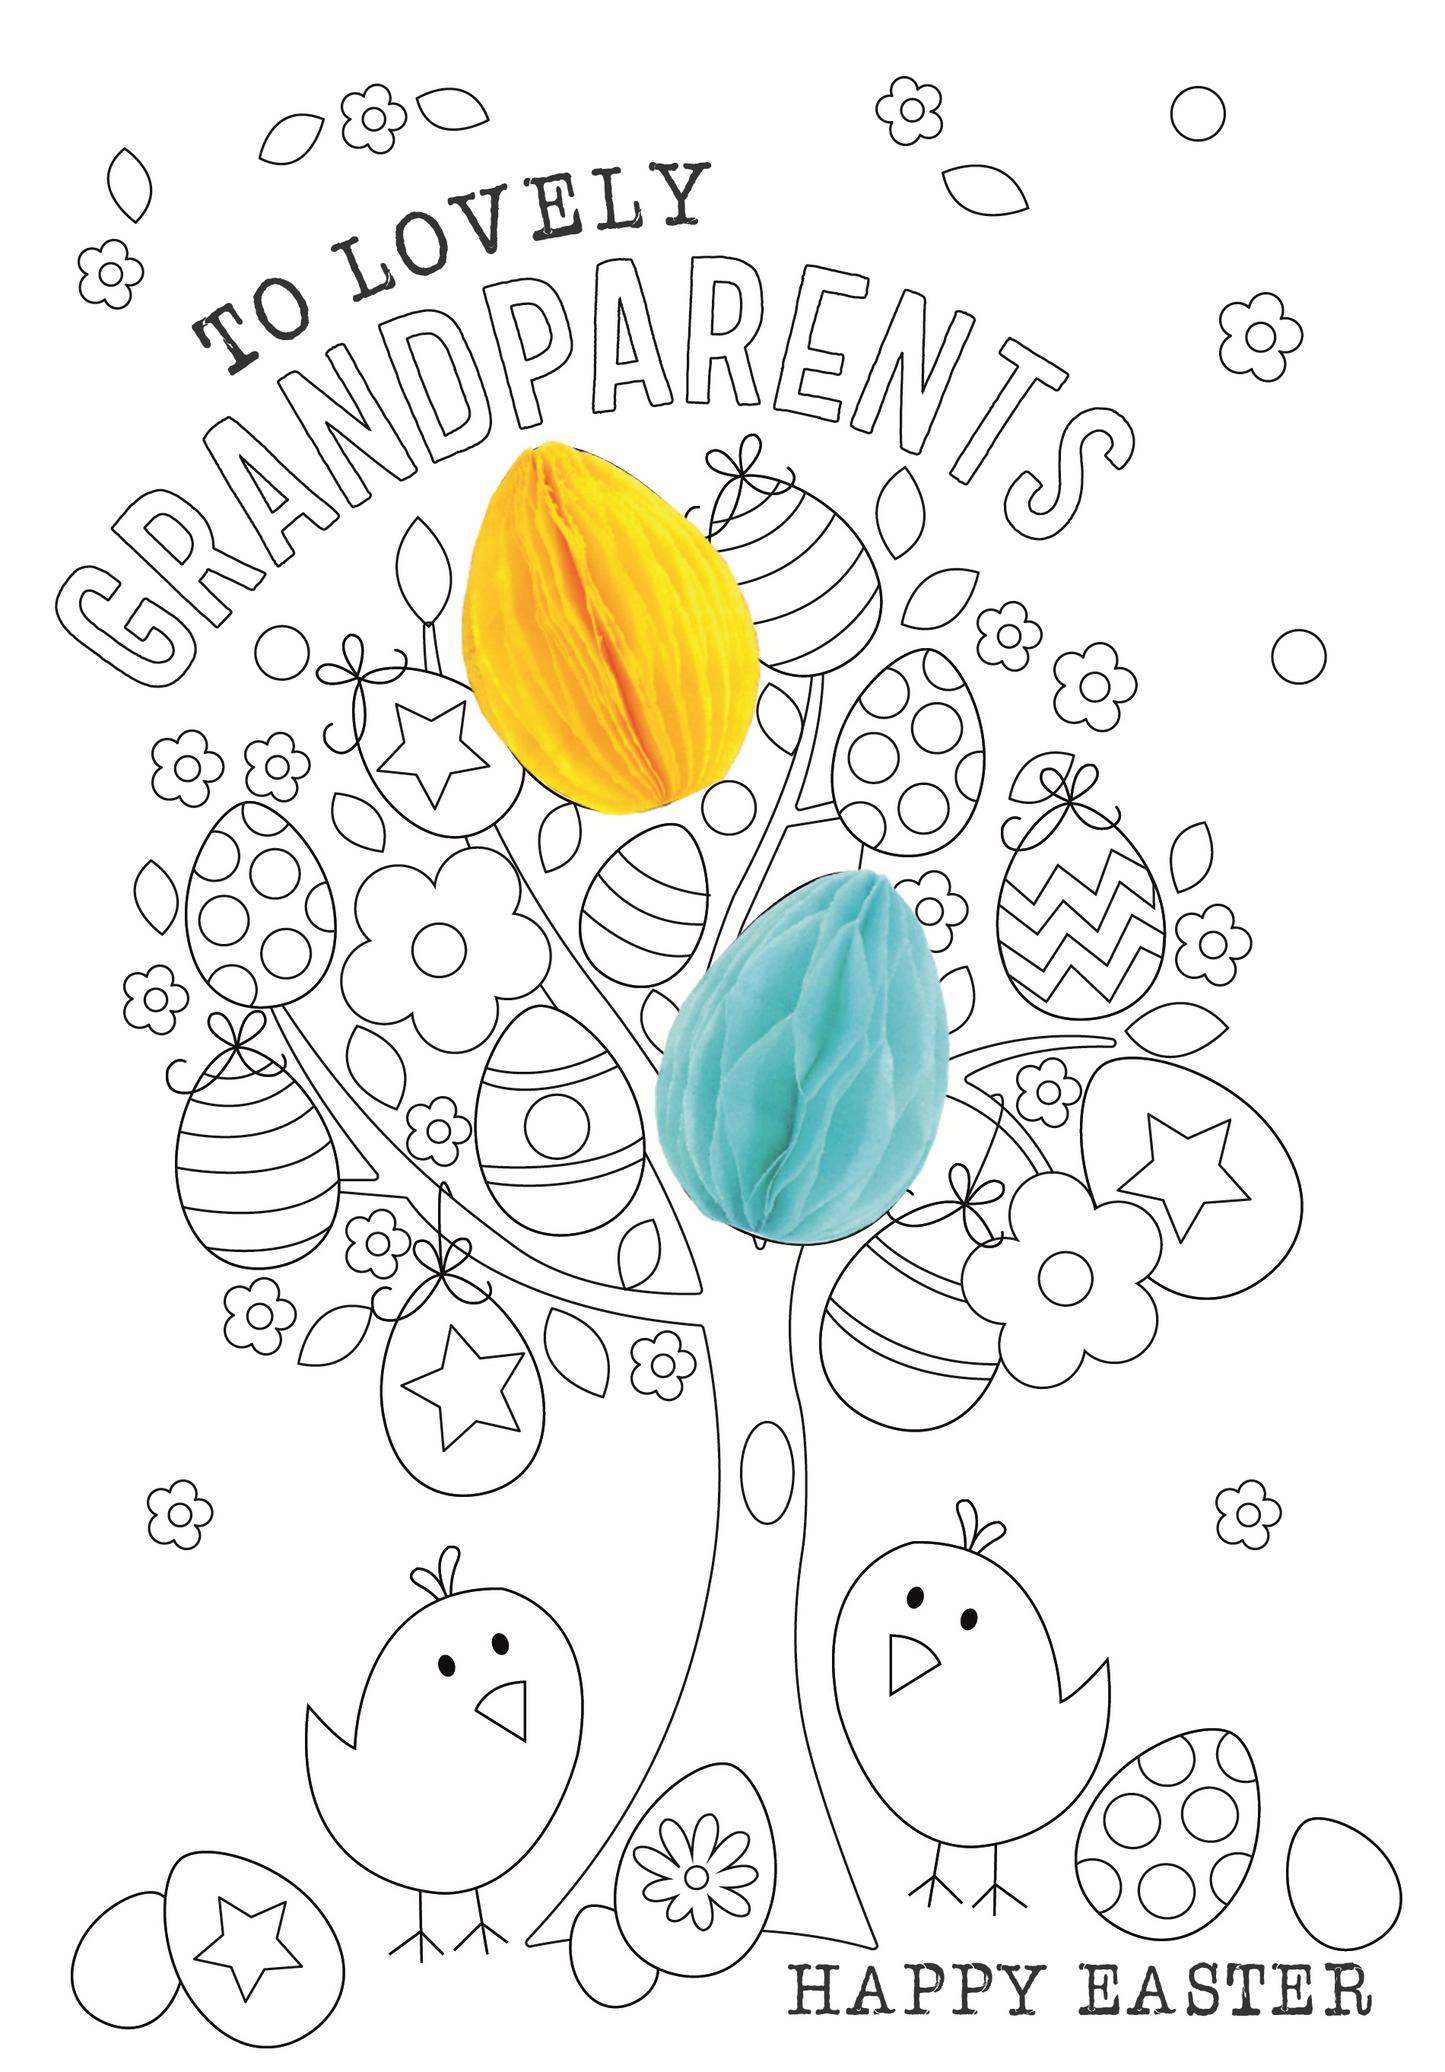 Lovely Grandparents Colour-Me-In Easter Activity Card With Honeycomb